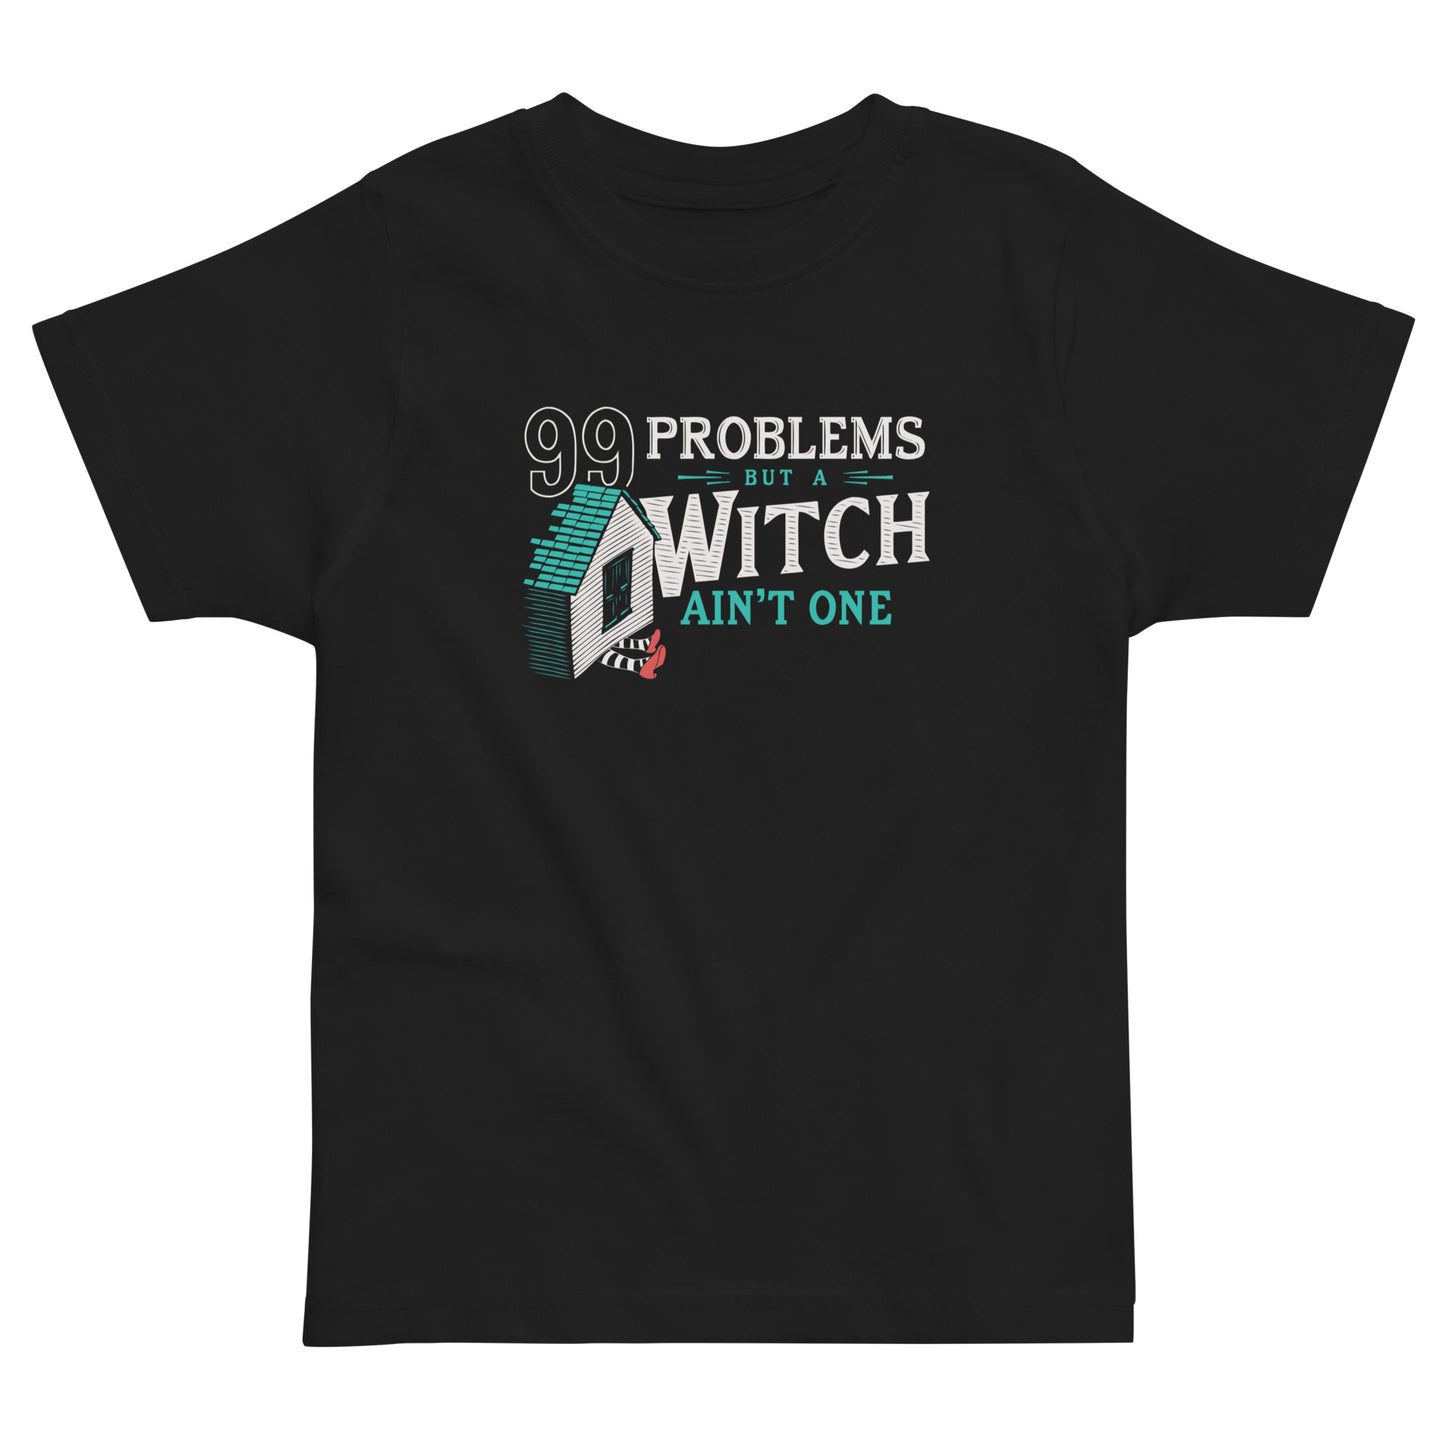 99 Problems But A Witch Ain't One Kid's Toddler Tee